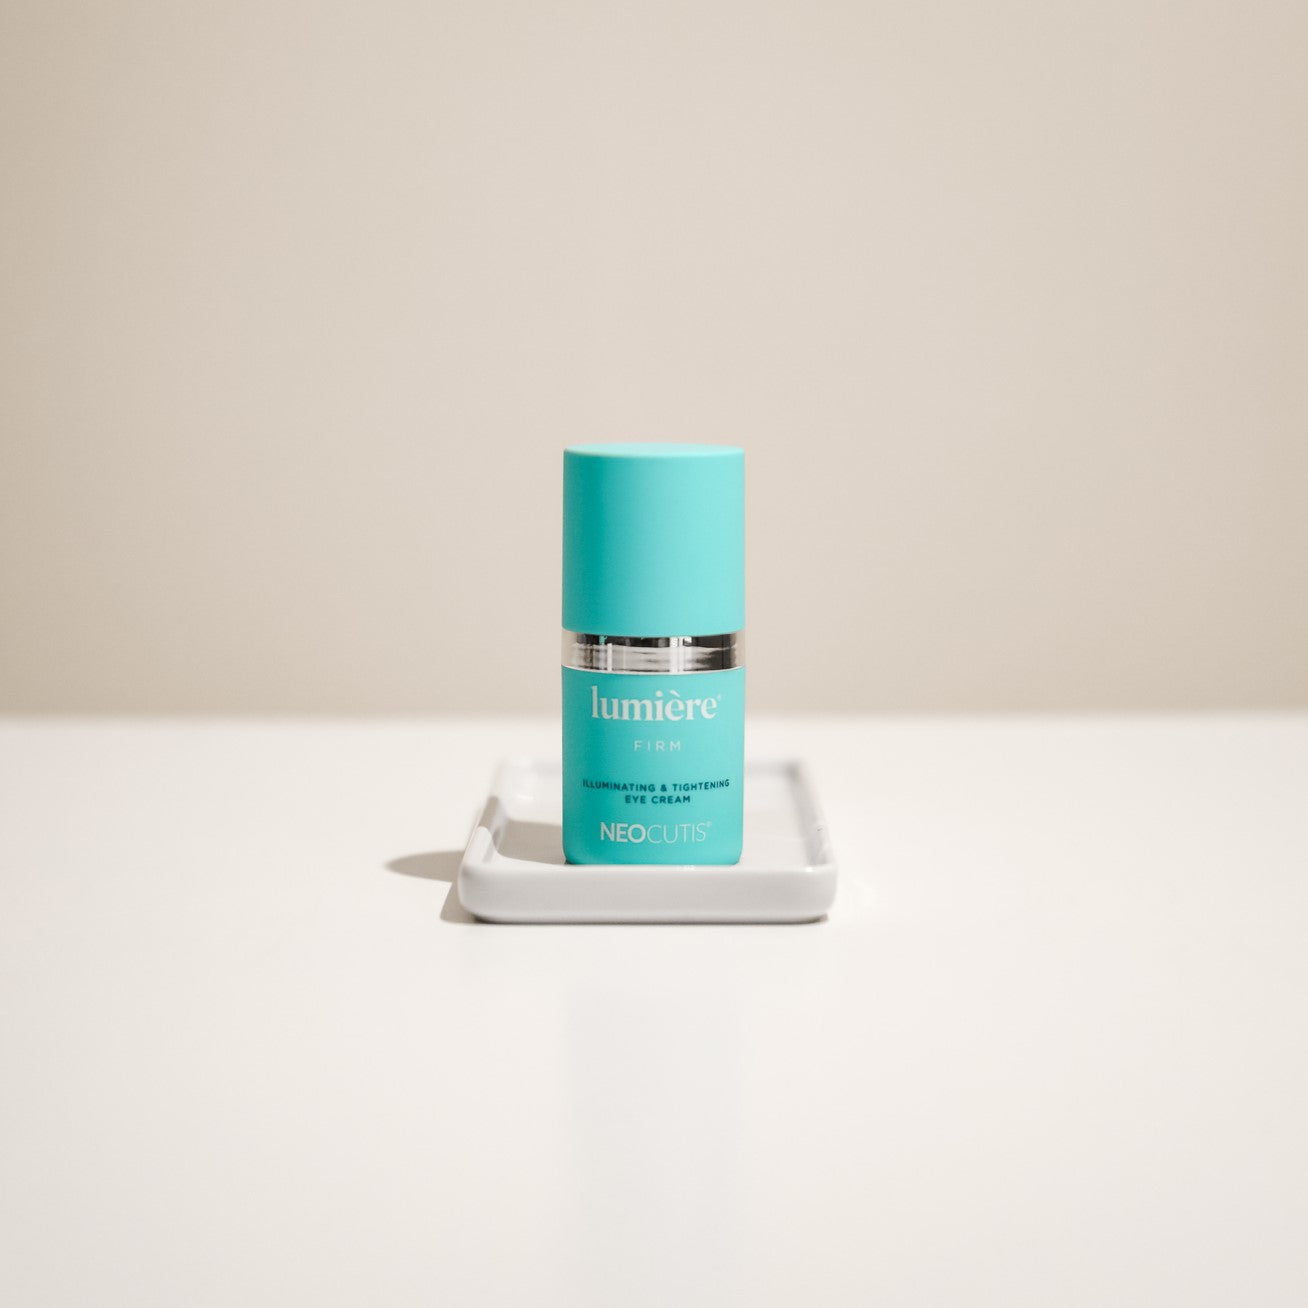 Lumiere Firm Eye Cream from Neocutis reduces fine lines and wrinkles